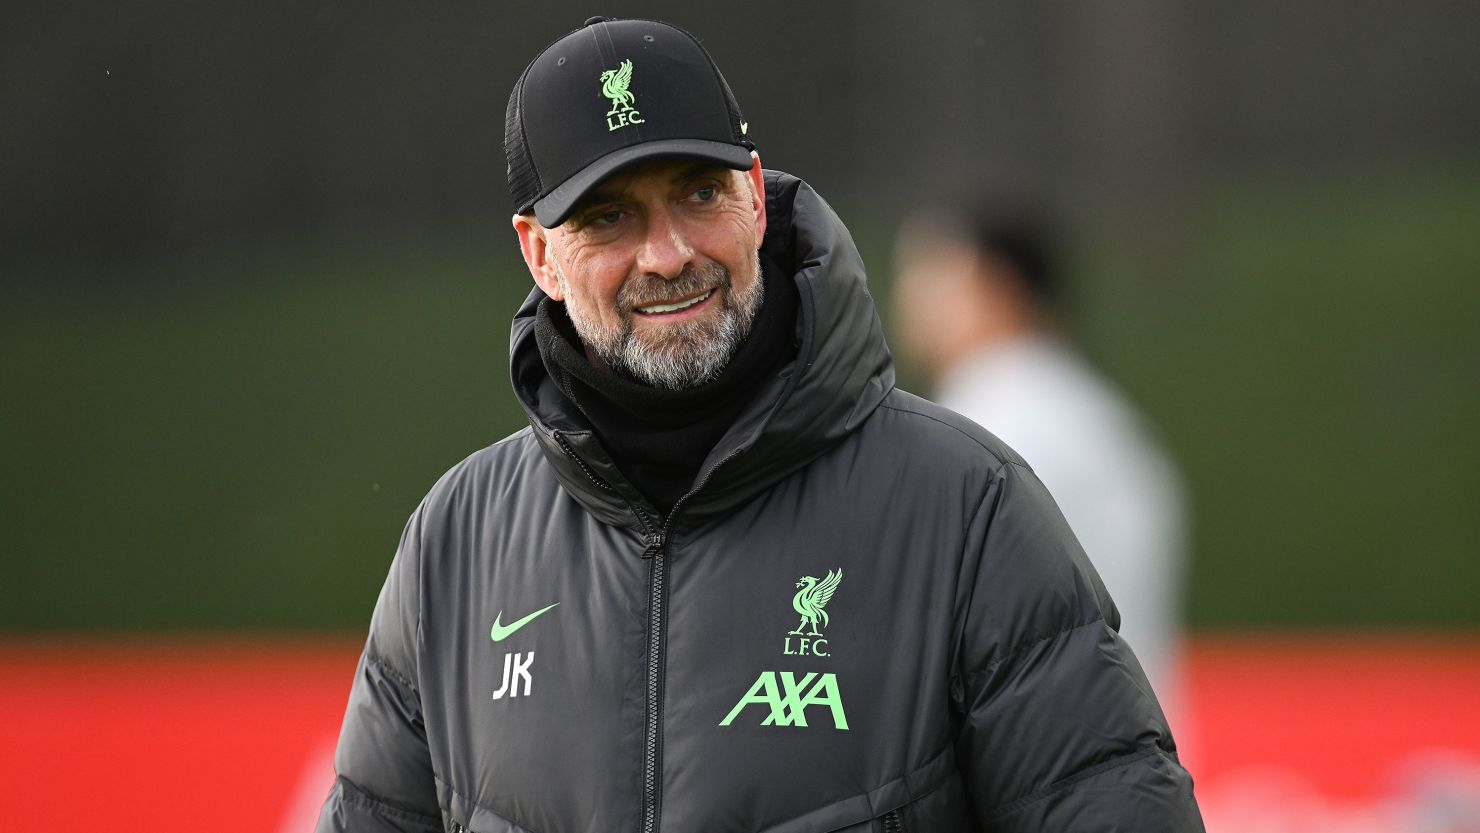 KIRKBY, ENGLAND - DECEMBER 29: (THE SUN OIT. THE SUN ON SUNDAY OUT) Jurgen Klopp manager of Liverpool during a training session at AXA Training Centre on December 29, 2023 in Kirkby, England. (Photo by John Powell/Liverpool FC via Getty Images)